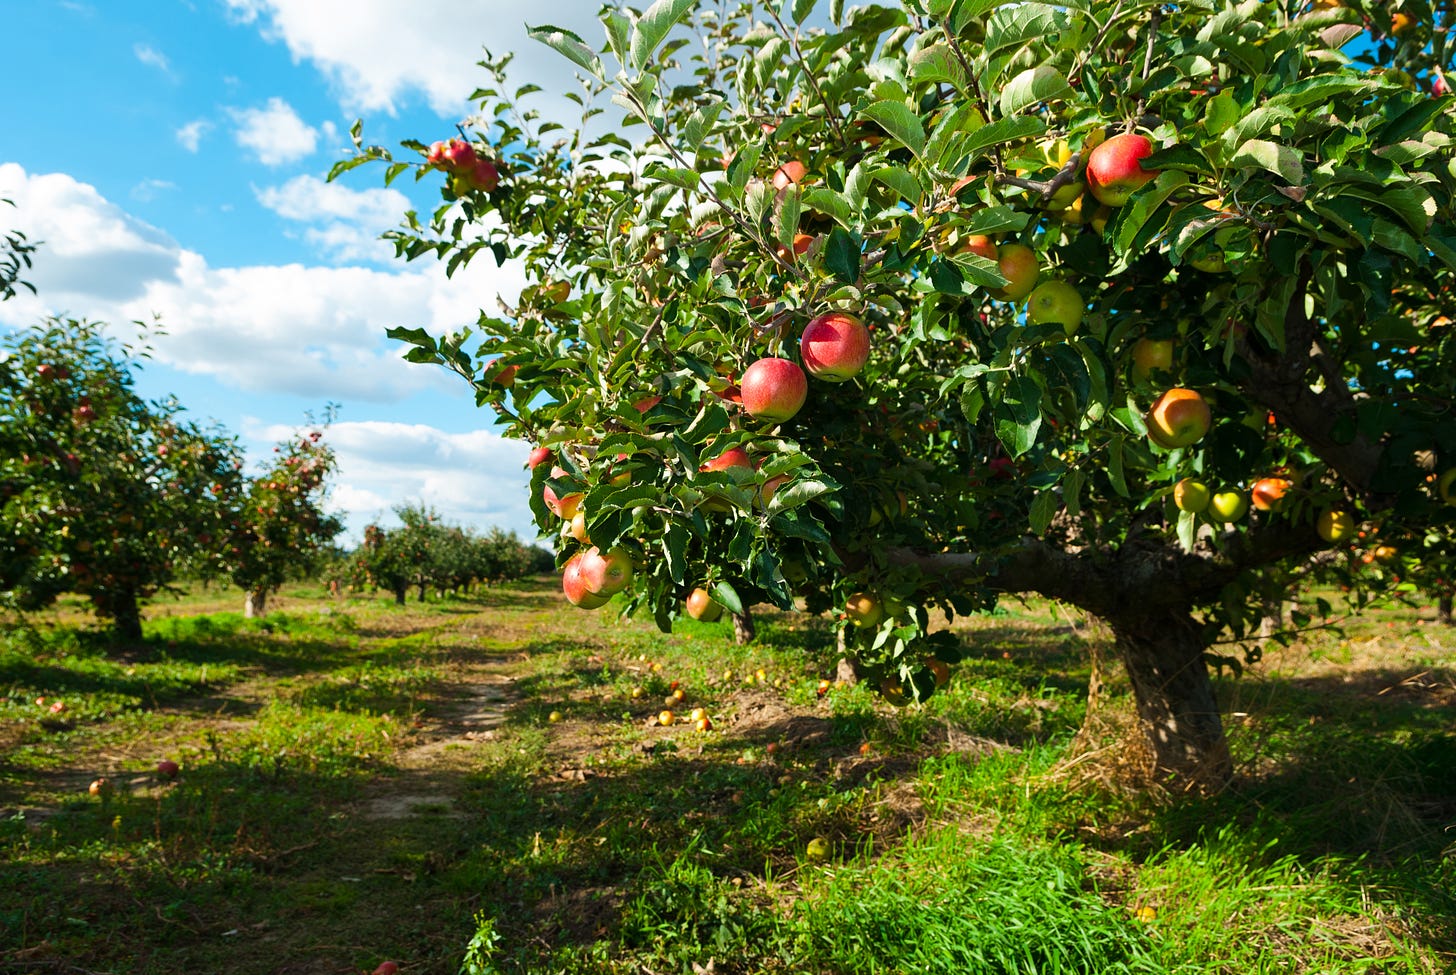 What Is the Habitat of an Apple Tree? | ehow